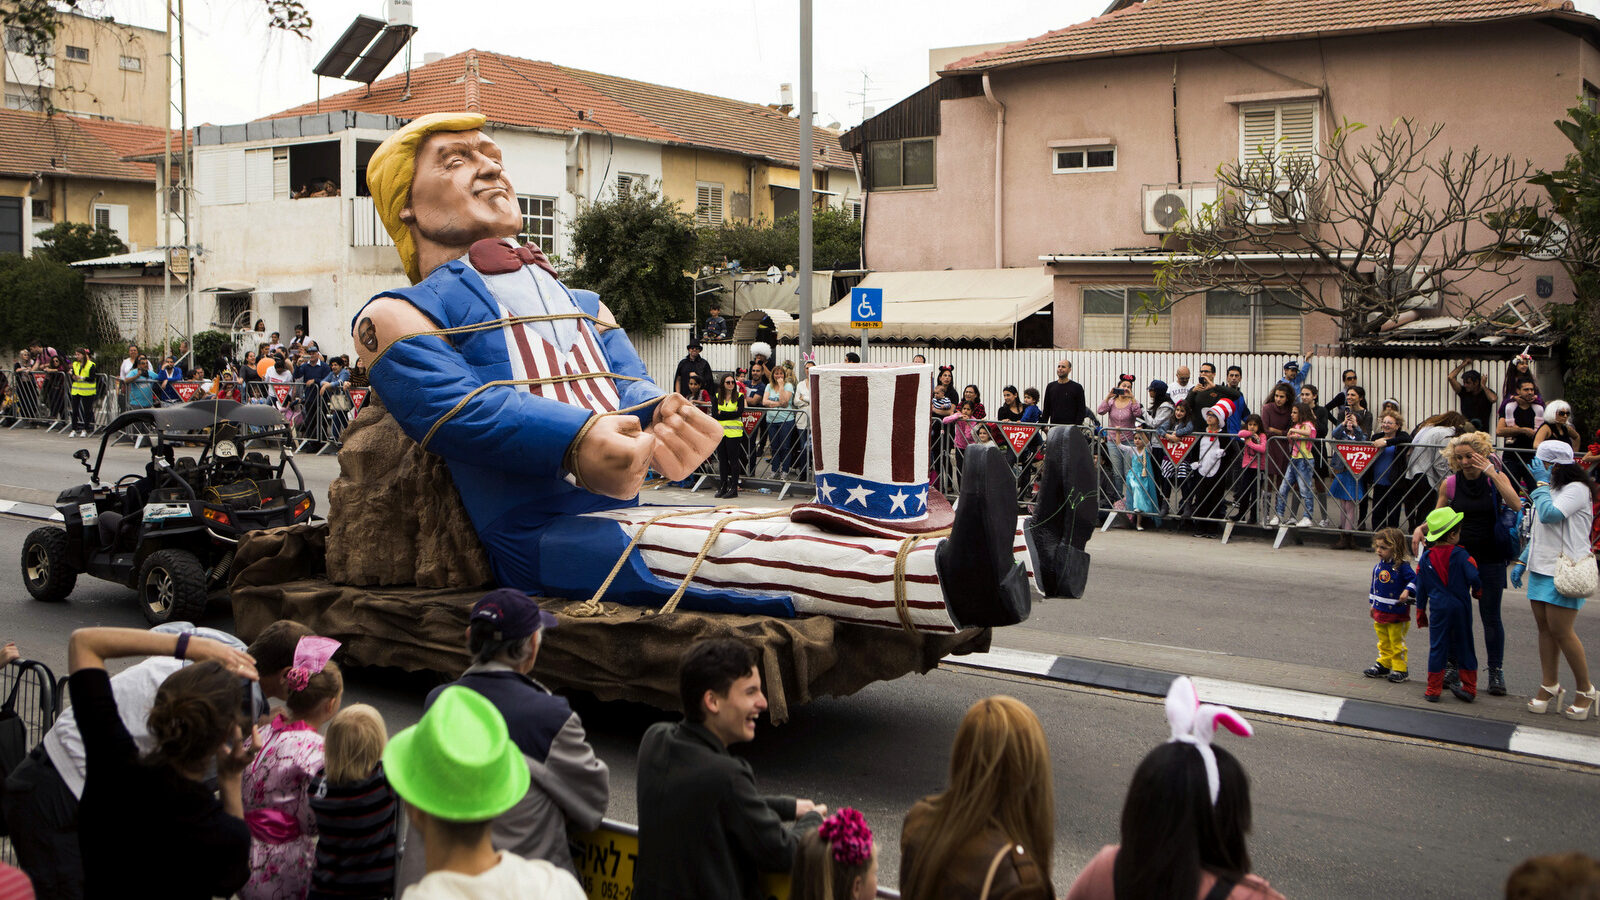 People watch a passing float of U.S. President Donald Trump during a march in a Purim parade in the town of Holon near Tel Aviv, Israel, Sunday, March 12, 2017. The Jewish holiday of Purim celebrates the Jews' salvation from genocide in ancient Persia, as recounted in the Scroll of Esther. (AP/Dan Balilty)